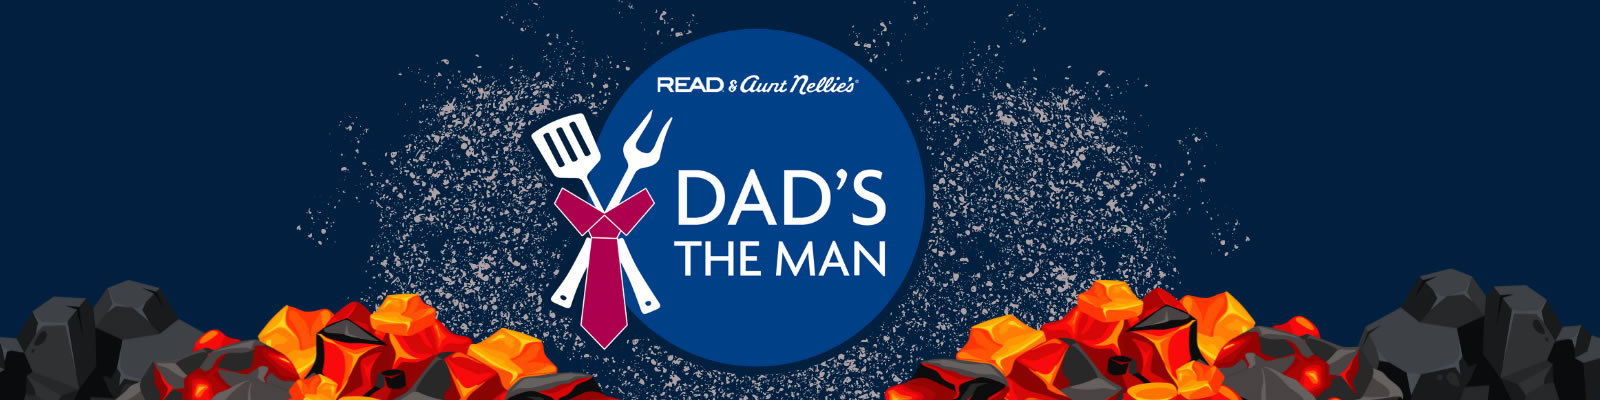 Dad's the Man Contest